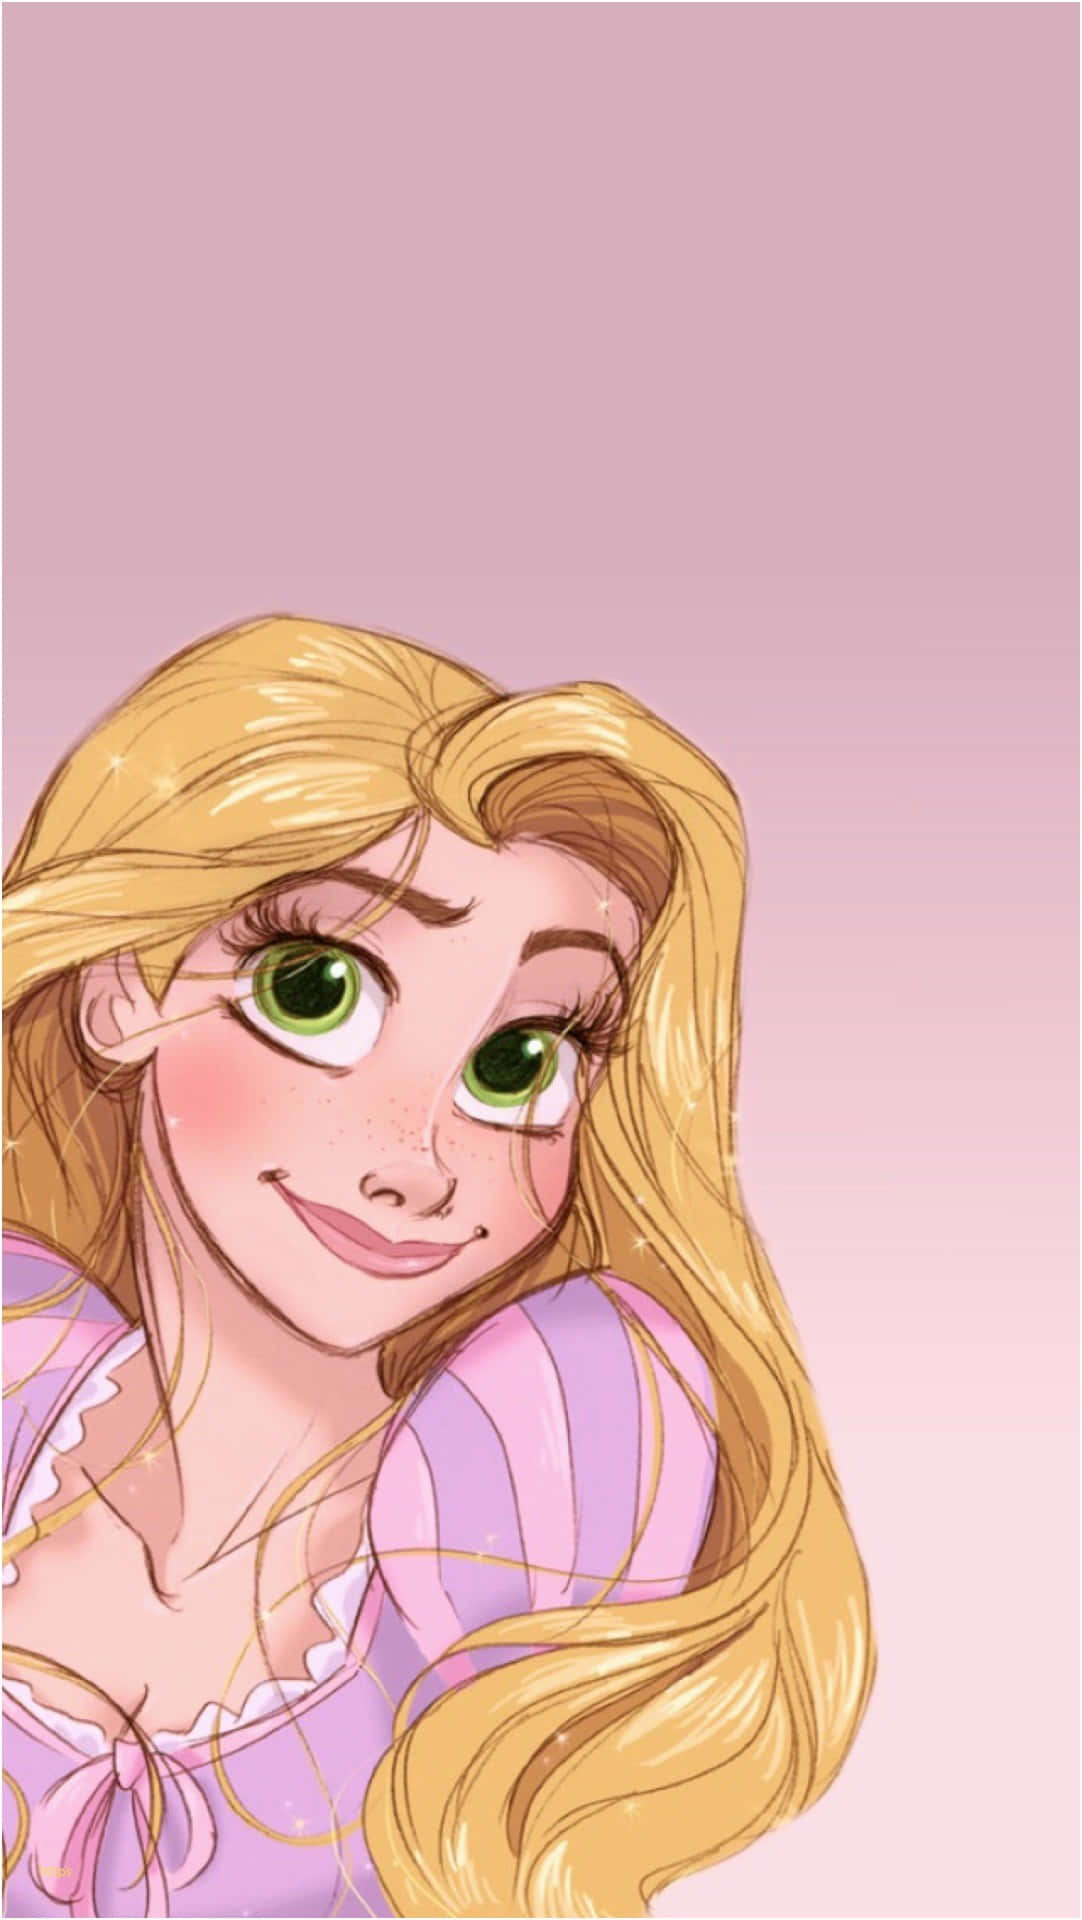 Rapunzel letting down her hair for the first time